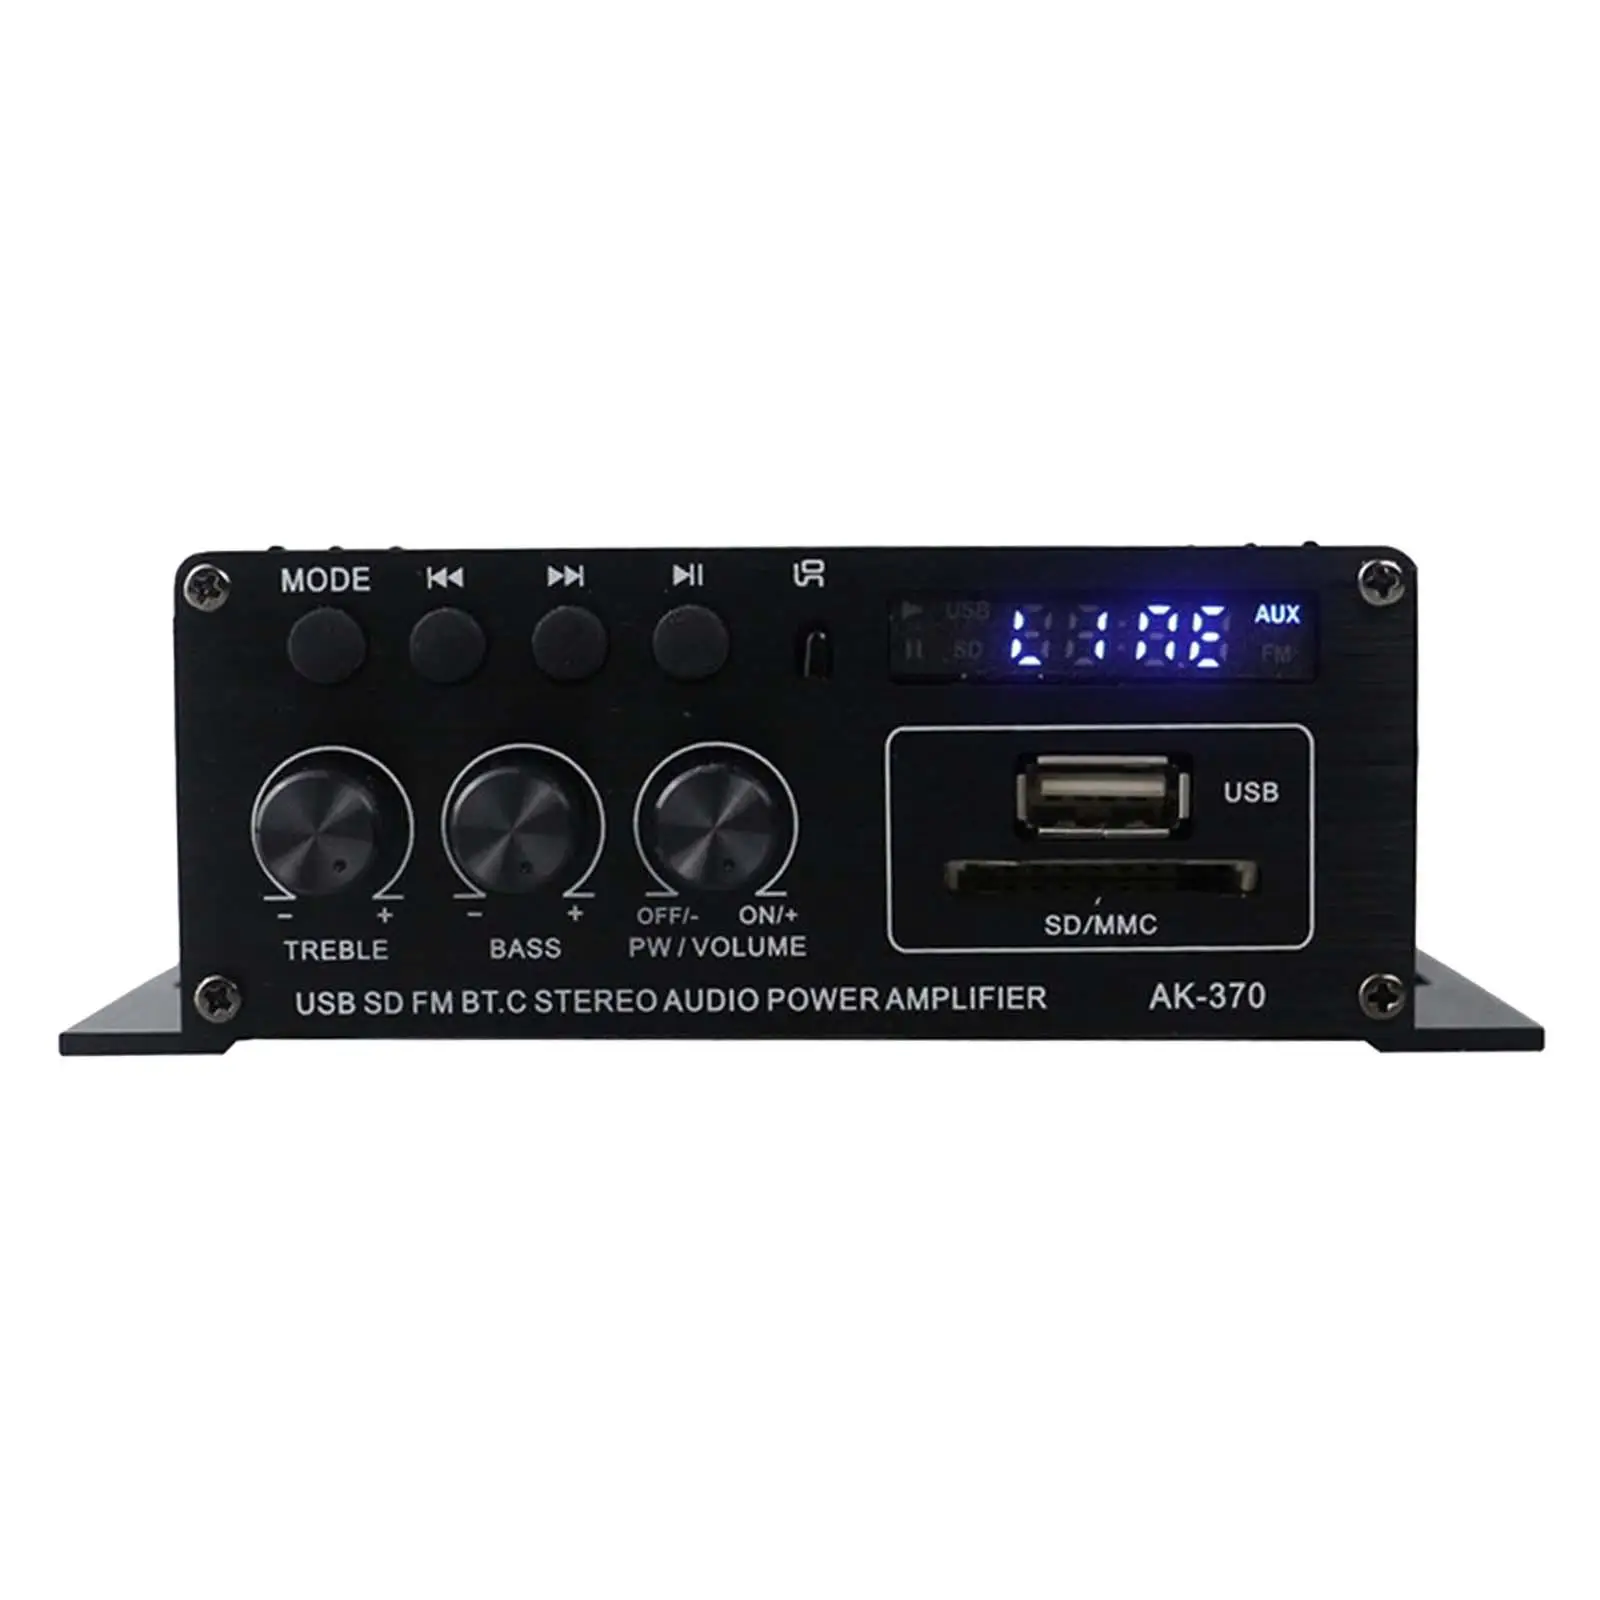 Audio Power Amplifier for Car Home Bar Party 12V-24V 20W+20W 2.0 Channel Bluetooth Power Amplifier HiFi Stereo Amp Speaker